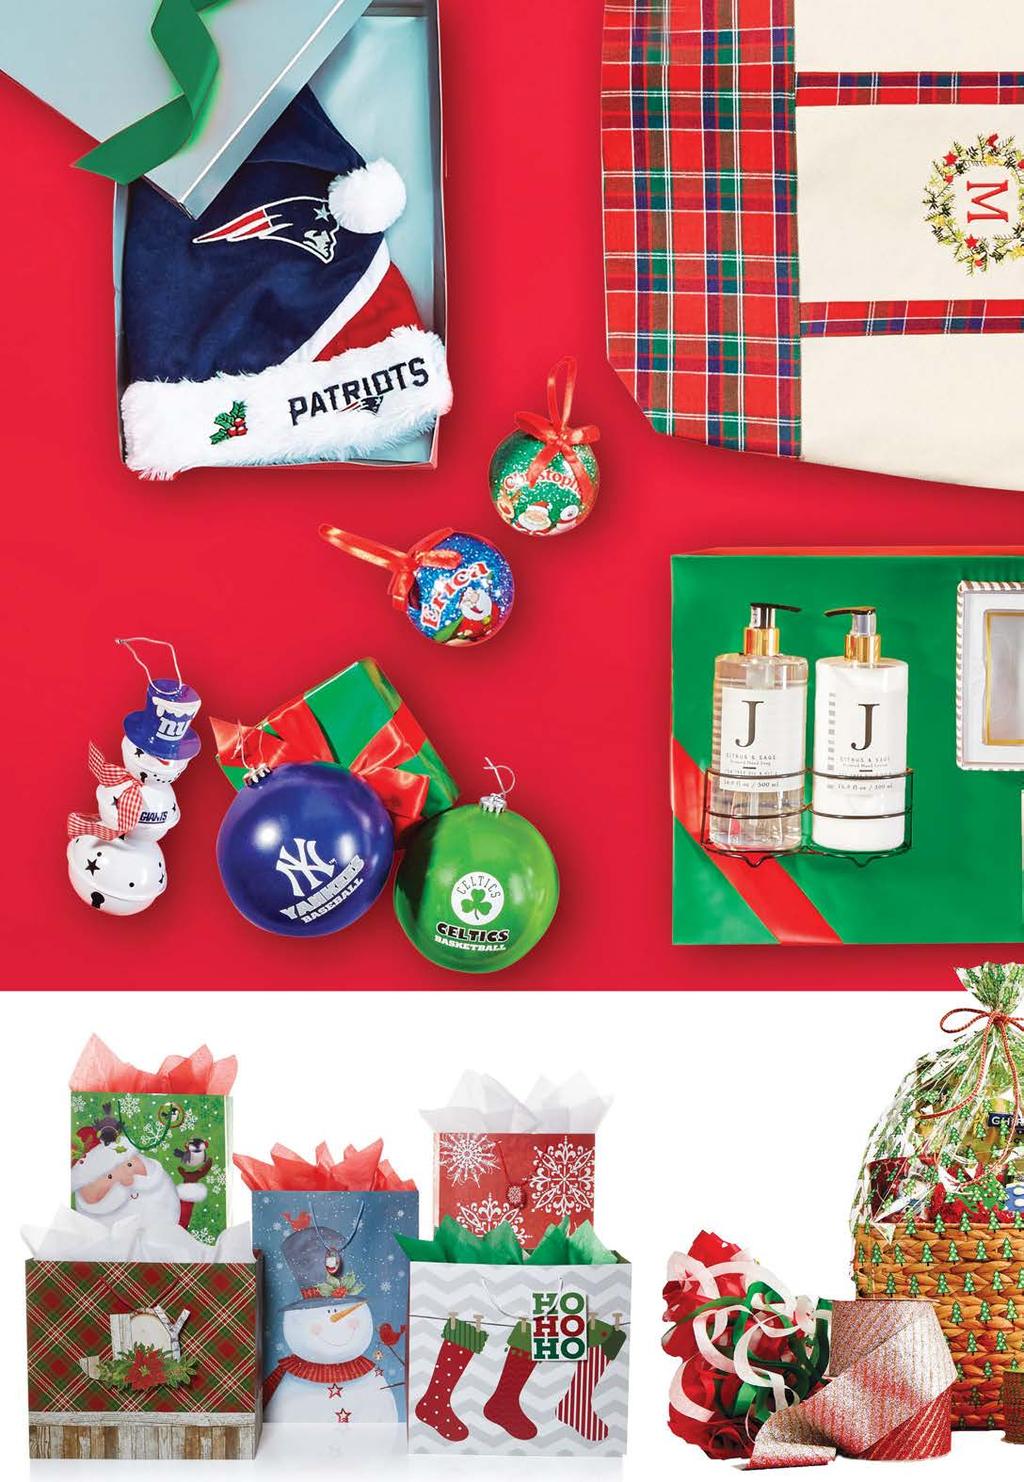 7 99 Licensed Sports Team Hats 7 99 Licensed Sports Team Jumbo Ornaments Jingle bell snowmen and 150mm ball ornaments. Teams vary by region.